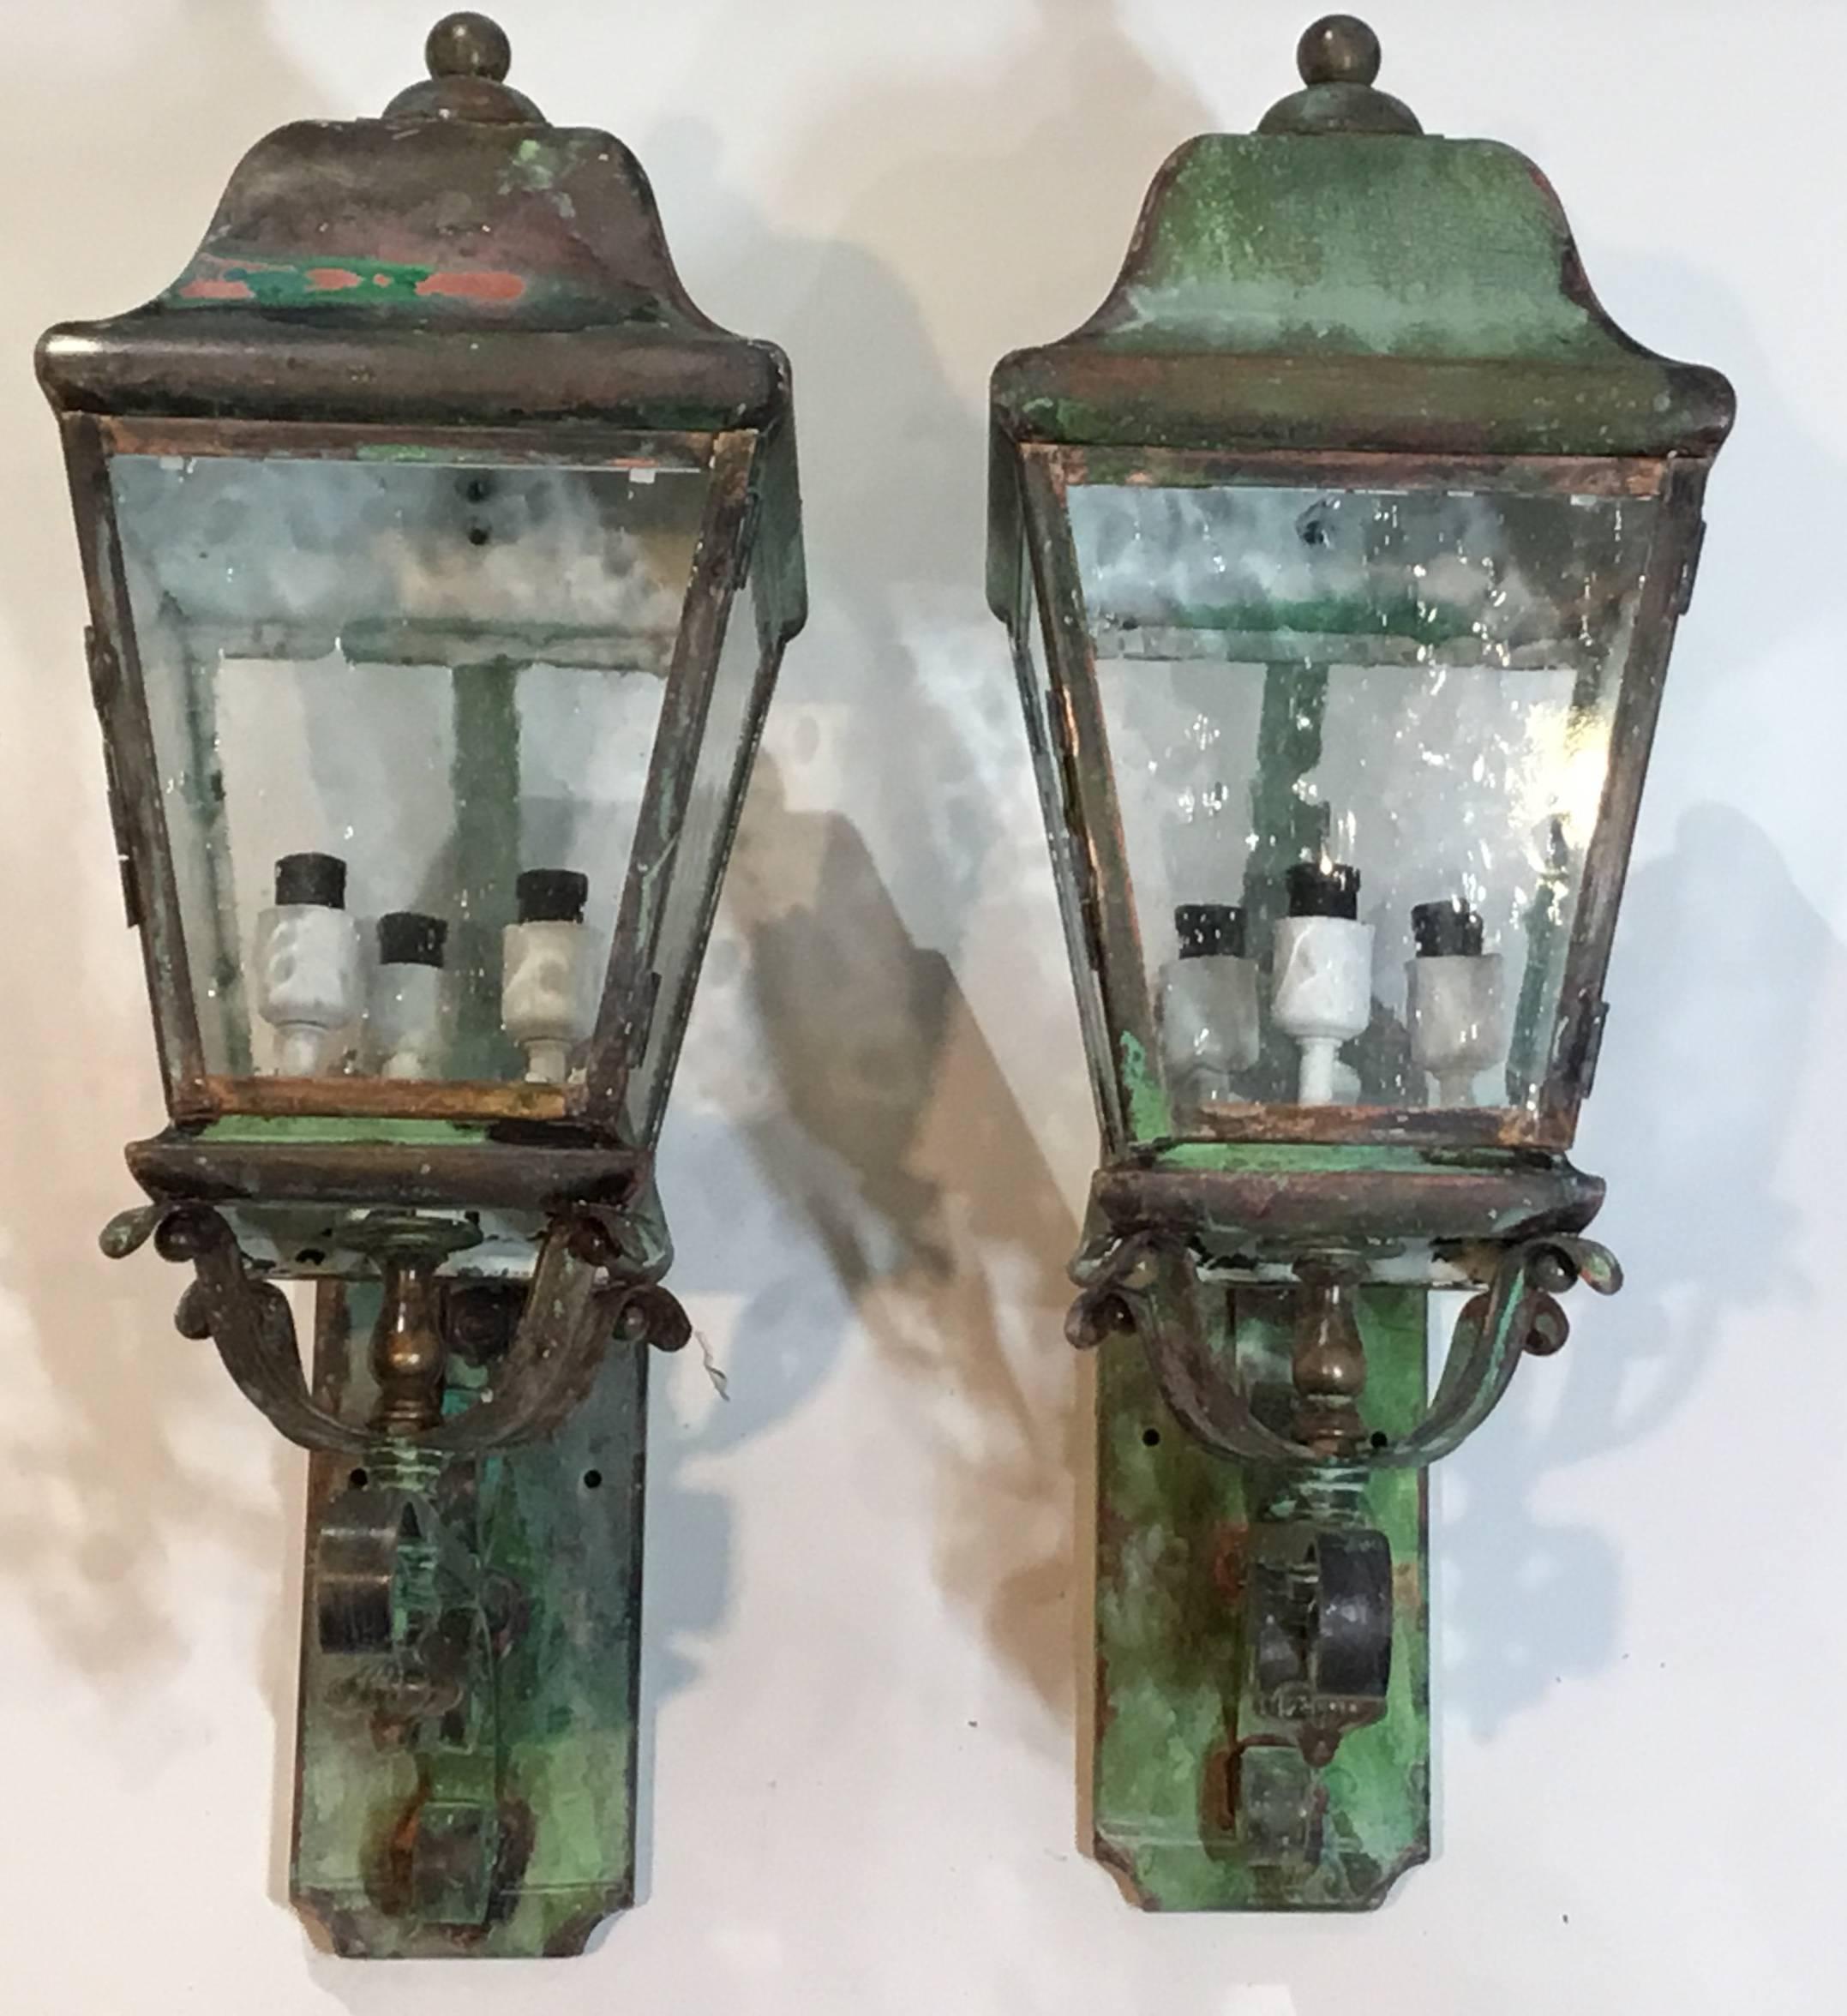 Elegant pair of vintage wall-mounted lantern made of brass and, with three 60/watt light on each,
Great looking patina very impressive in any front door or decorative indoor space.
One of the arm was slightly bent in order to have the lantern